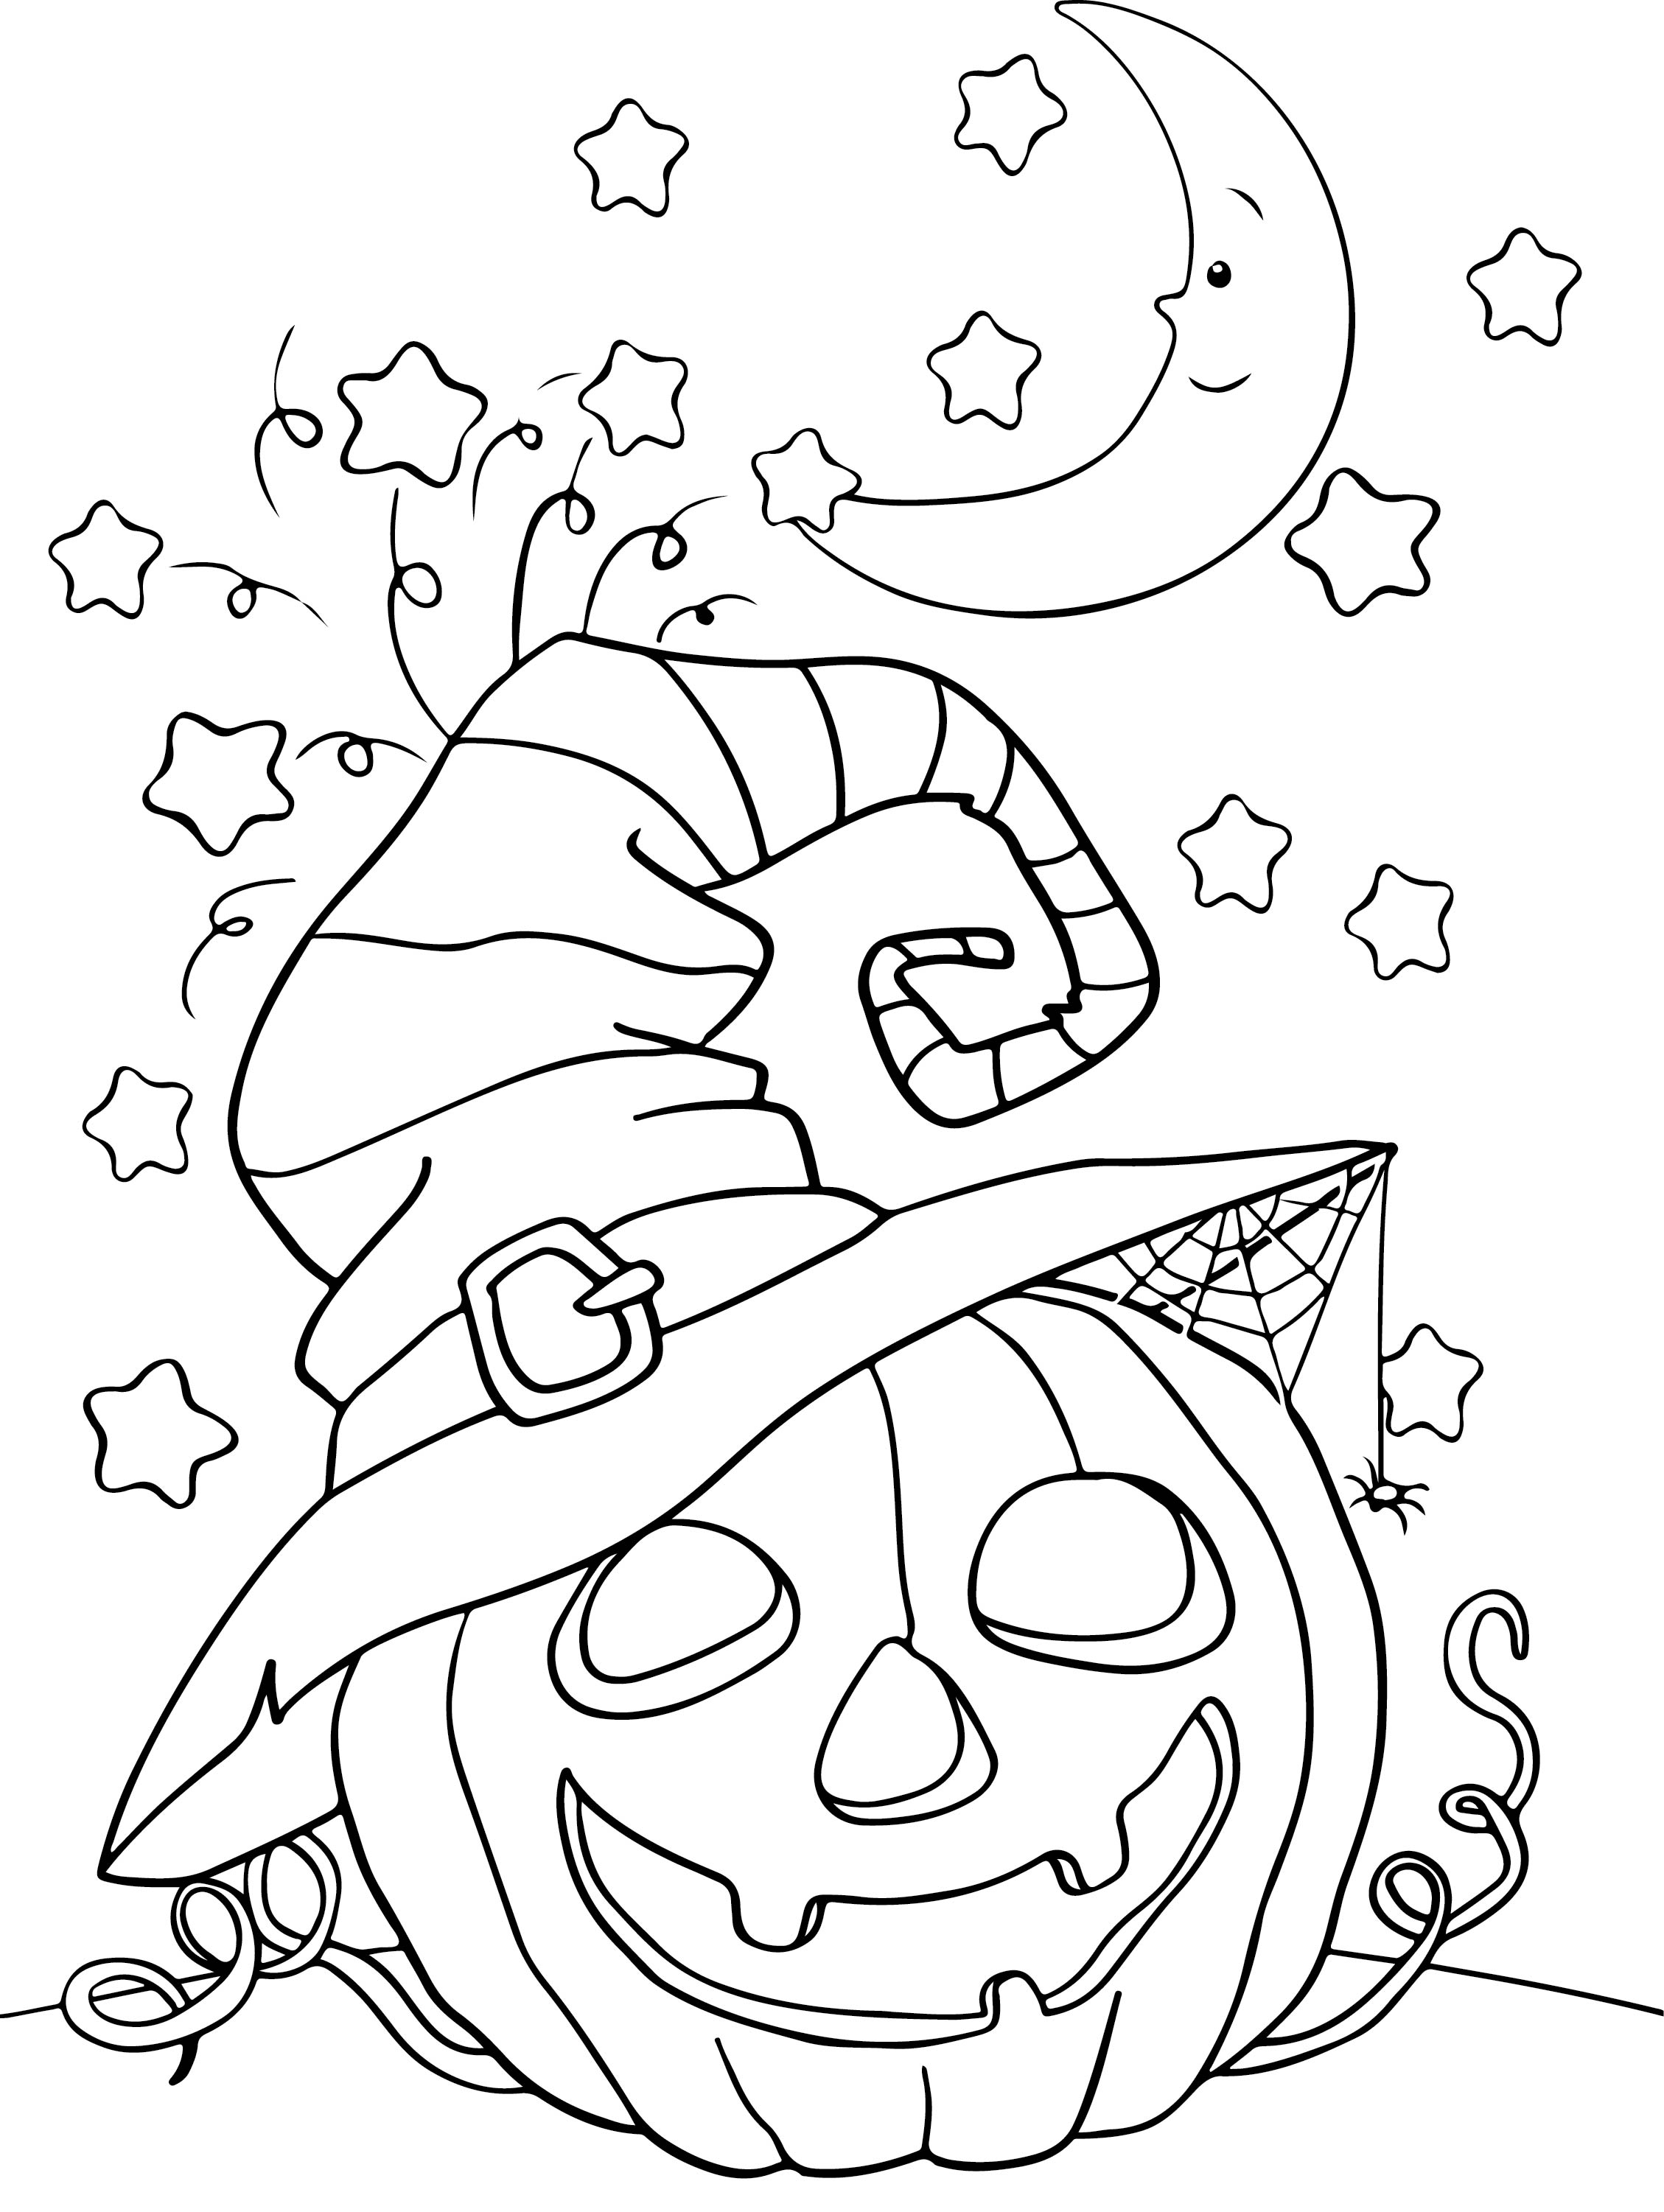 24-free-halloween-coloring-pages-for-kids-honey-lime